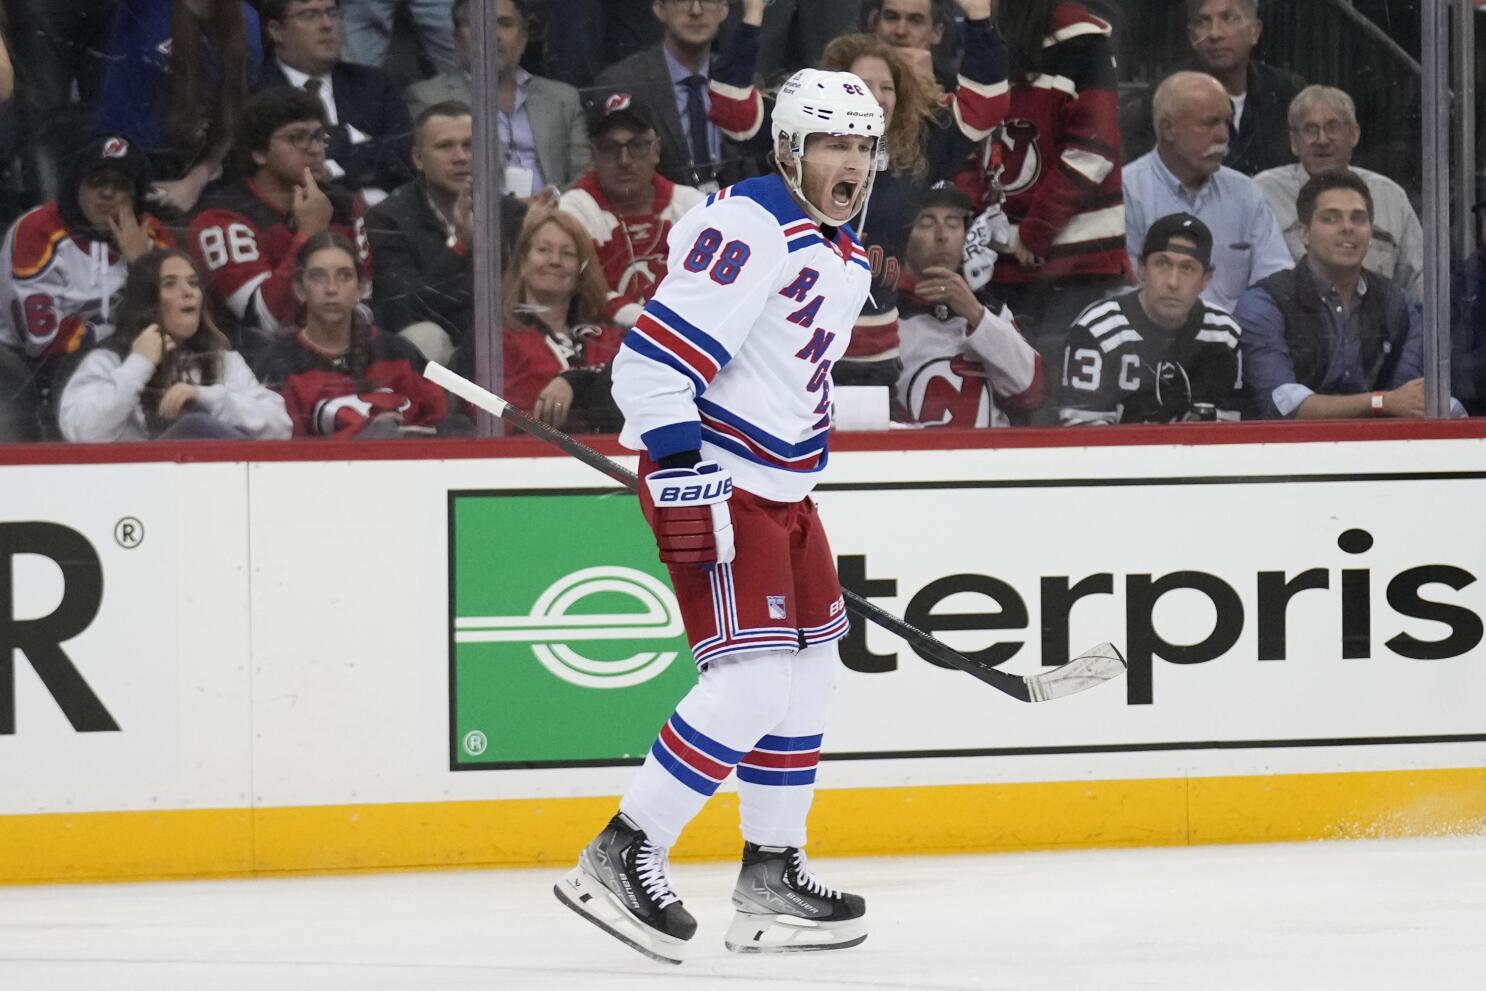 New Jersey Devils head into game 6 against Rangers with 3-2 lead